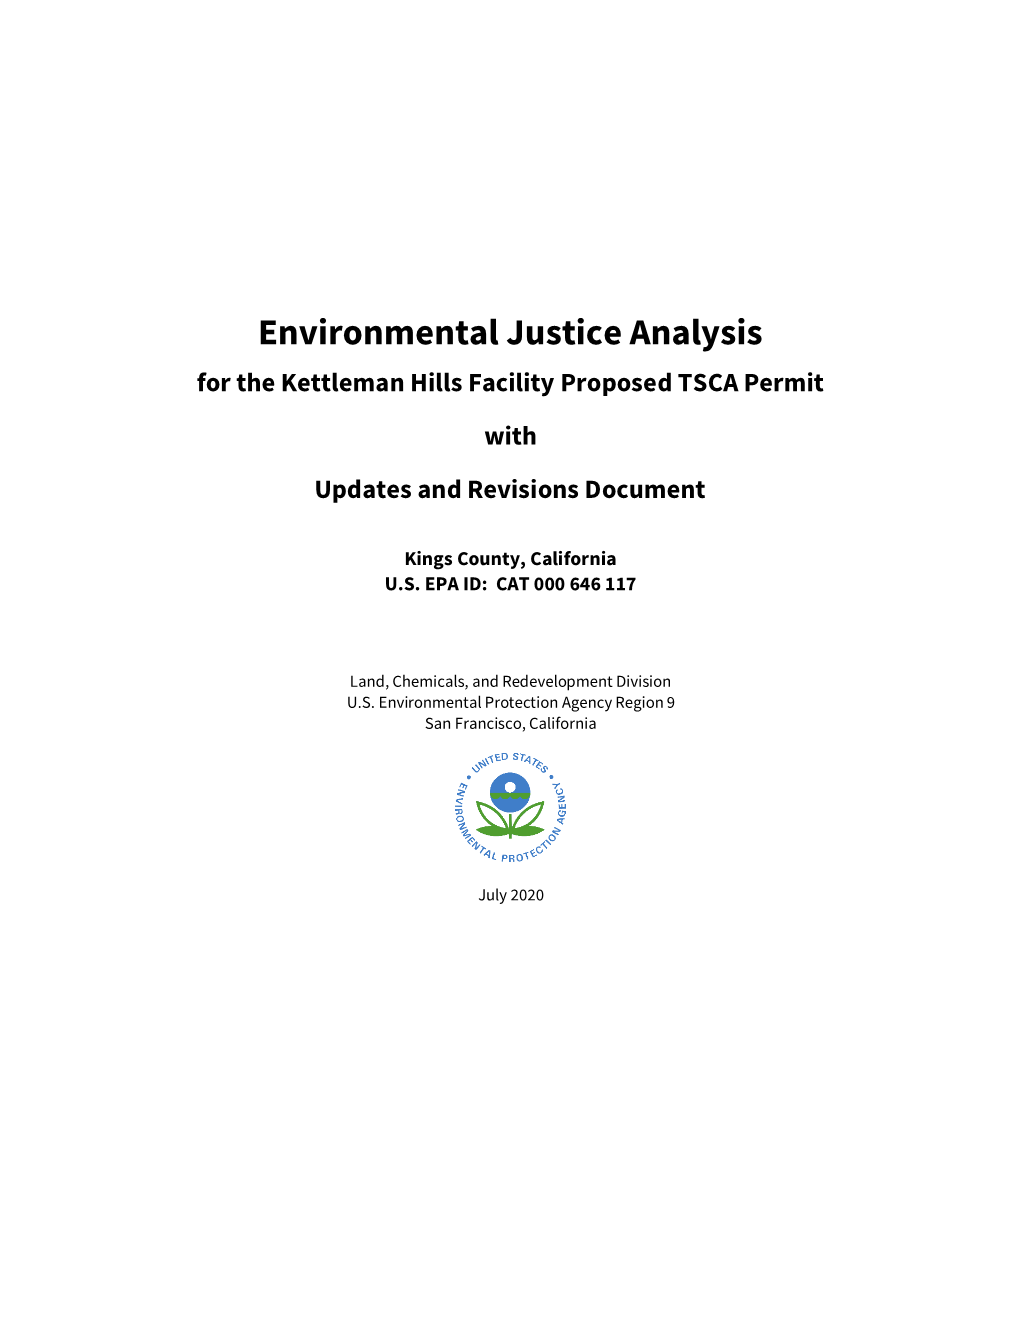 Environmental Justice Analysis for the Kettleman Hills Facility TSCA Permit with Updates and Revisions Document